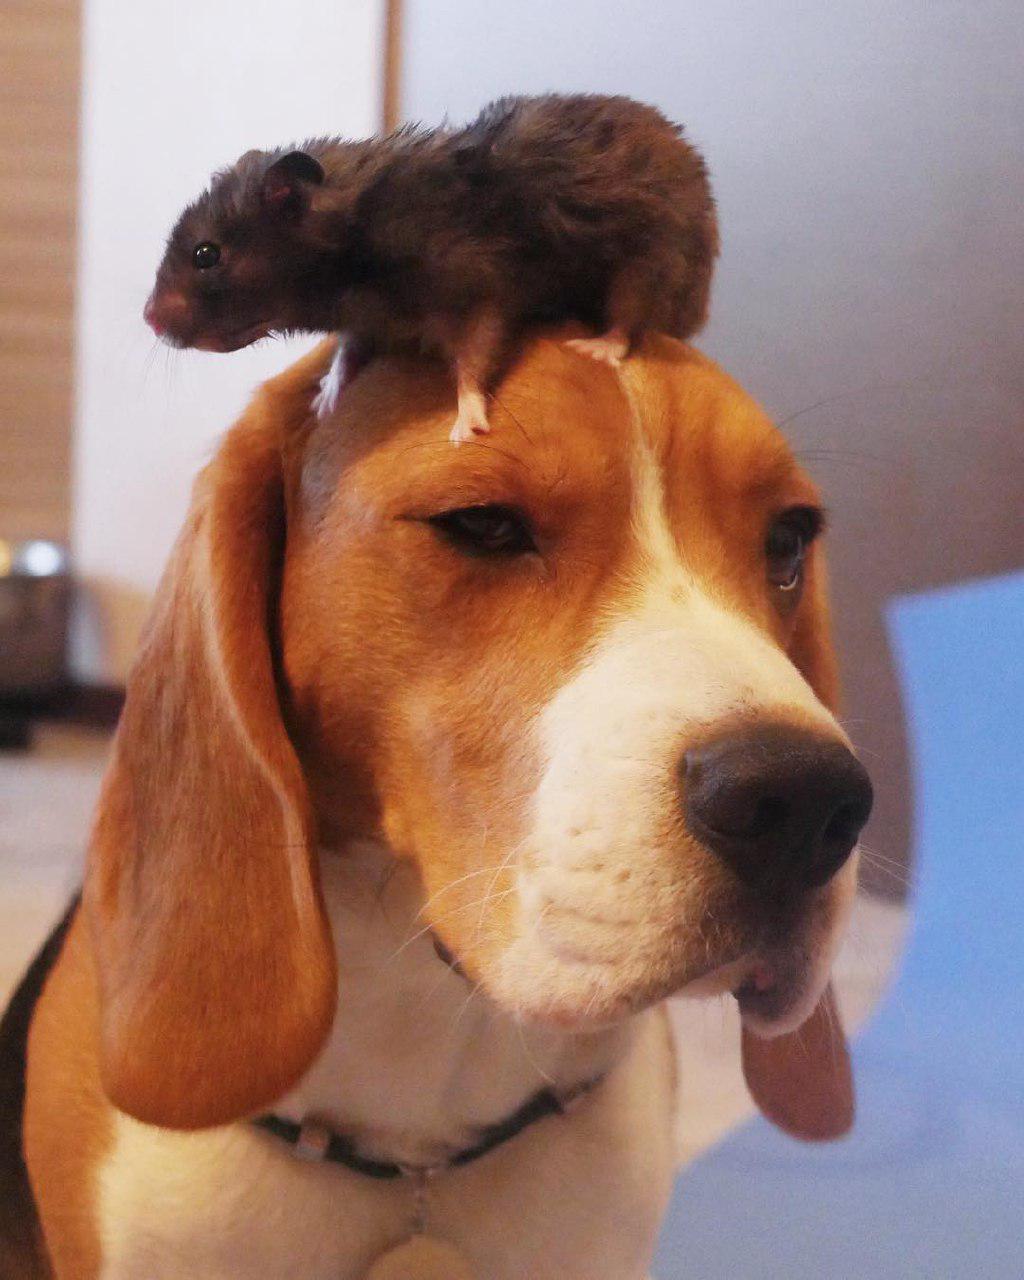 Beagle with a mouse on top of its head